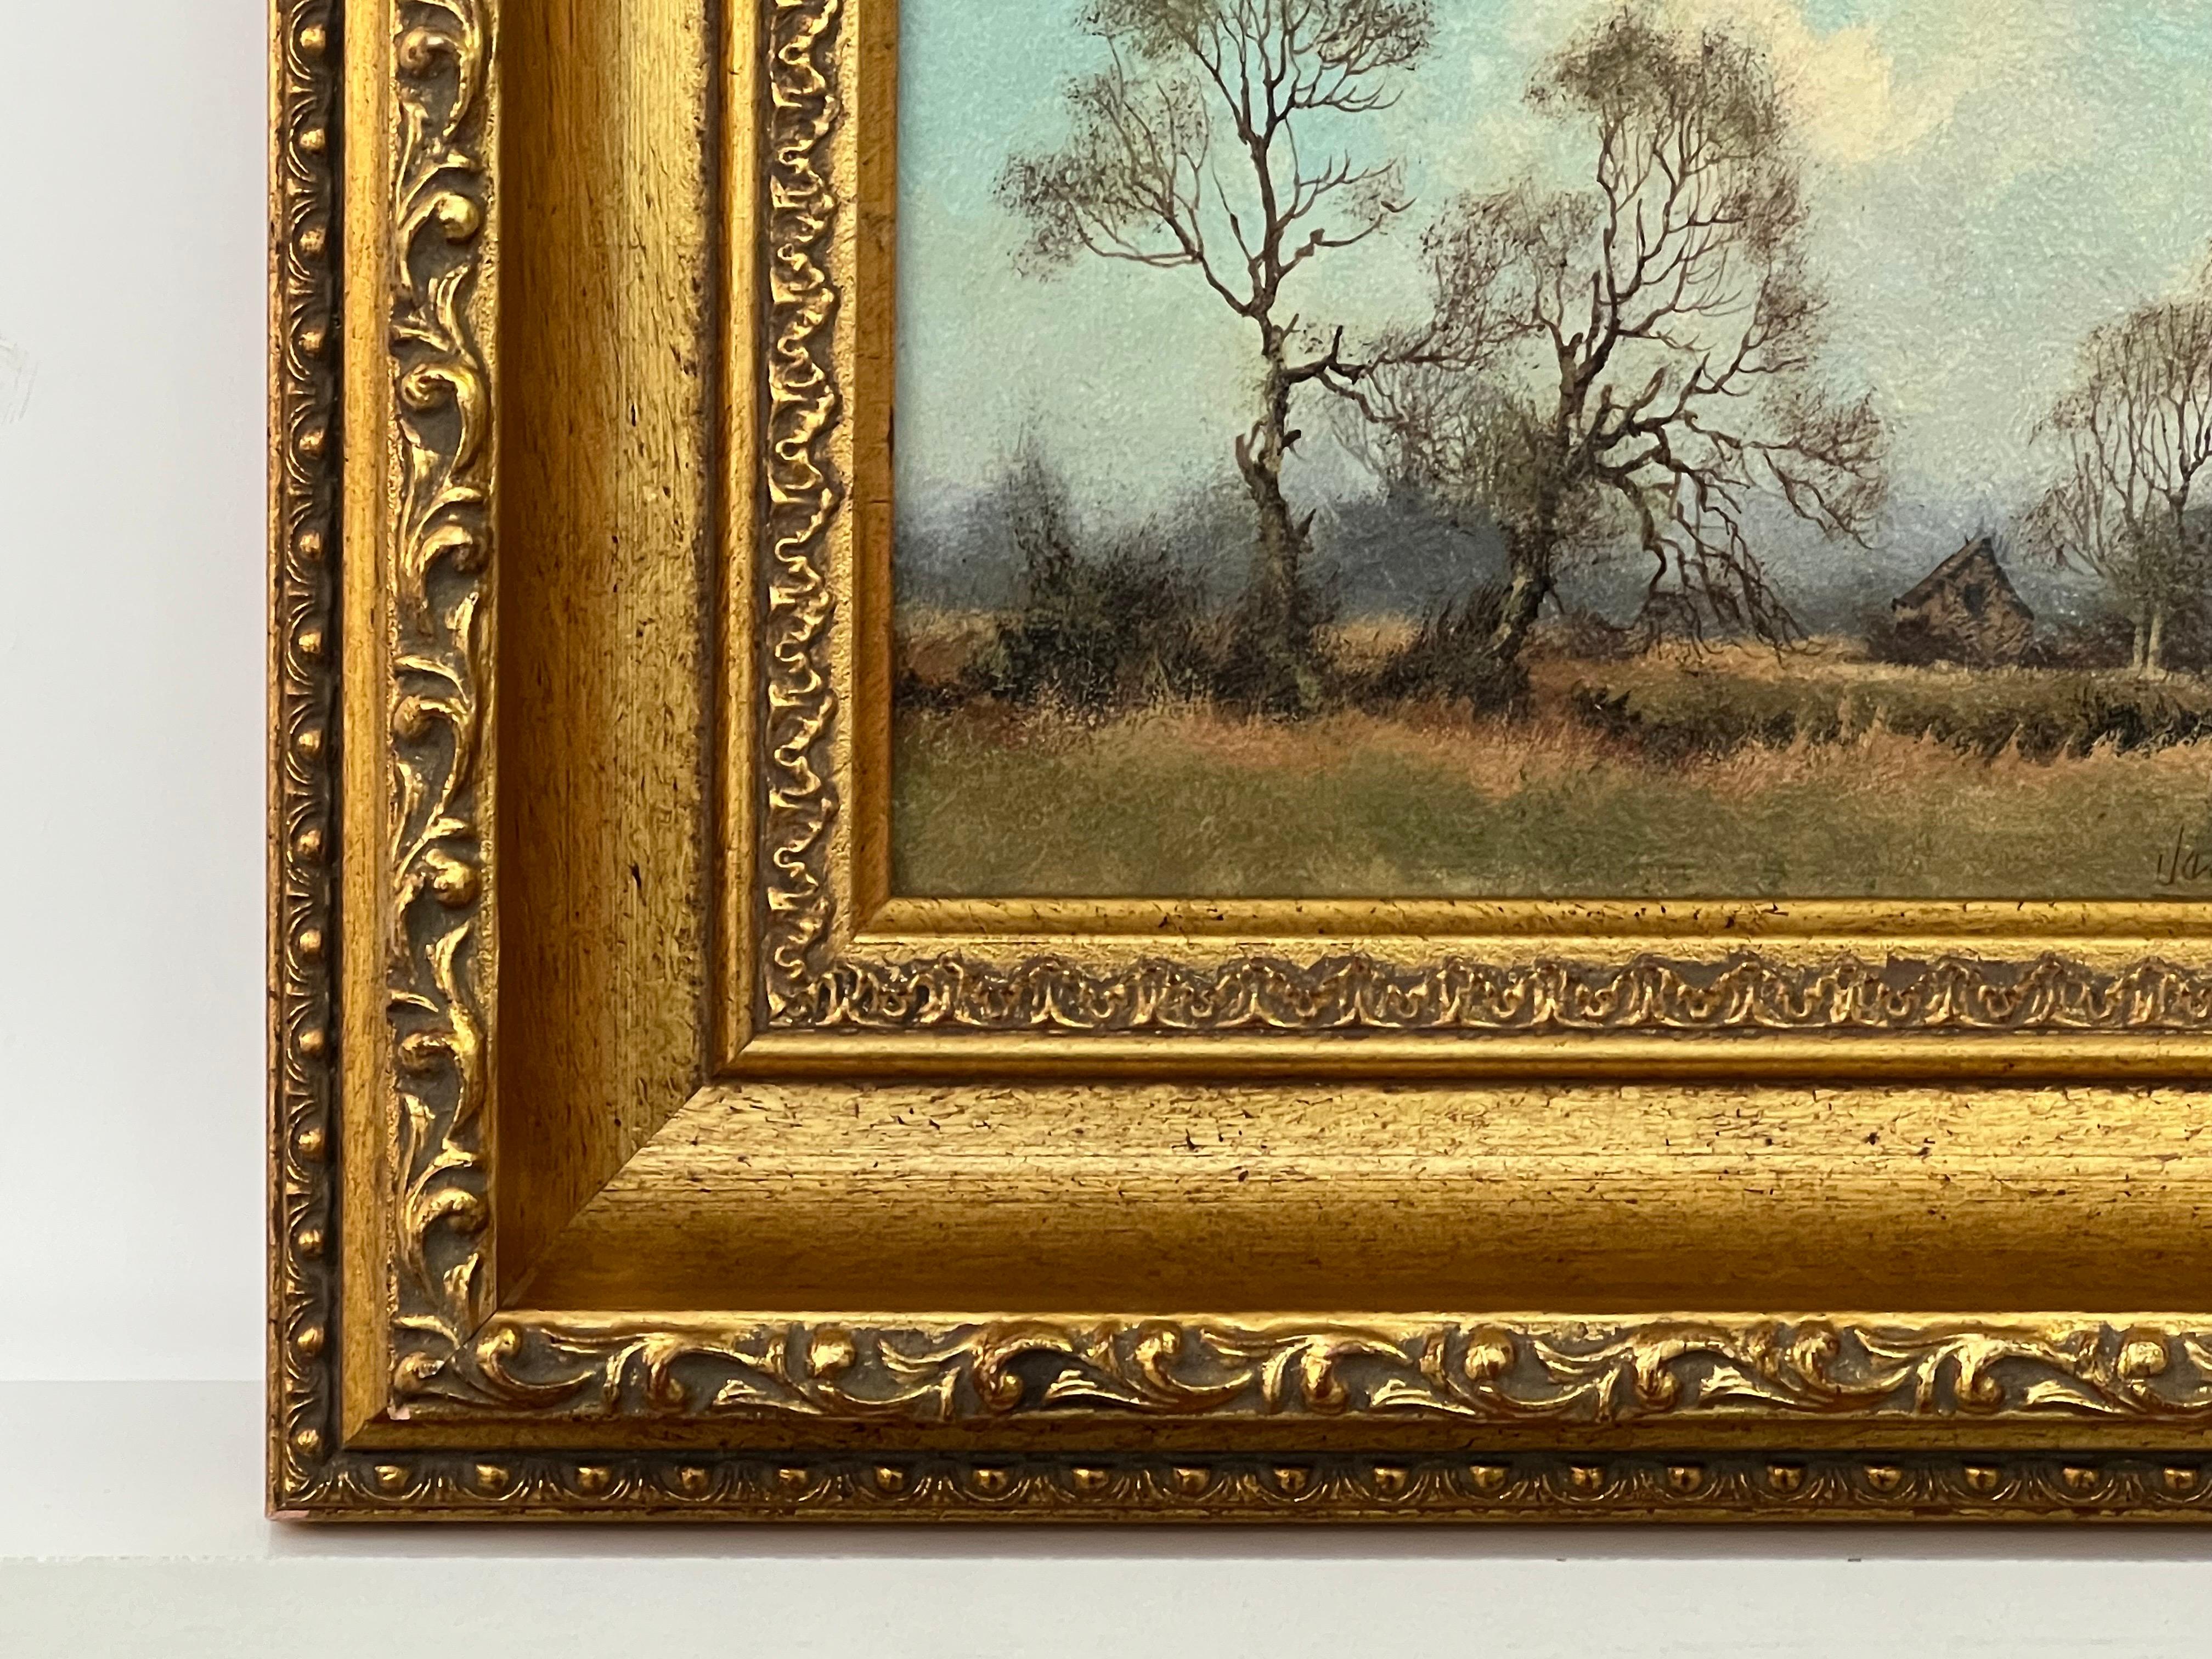 Trees & Cottage in the English Countryside by 20th Century British Landscape Artist, James Wright

Signed, Original, Oil on Canvas, housed in a beautiful ornate gold frame.
Provenance: Part of the English Heritage Series No.428

Art measures 7 x 5